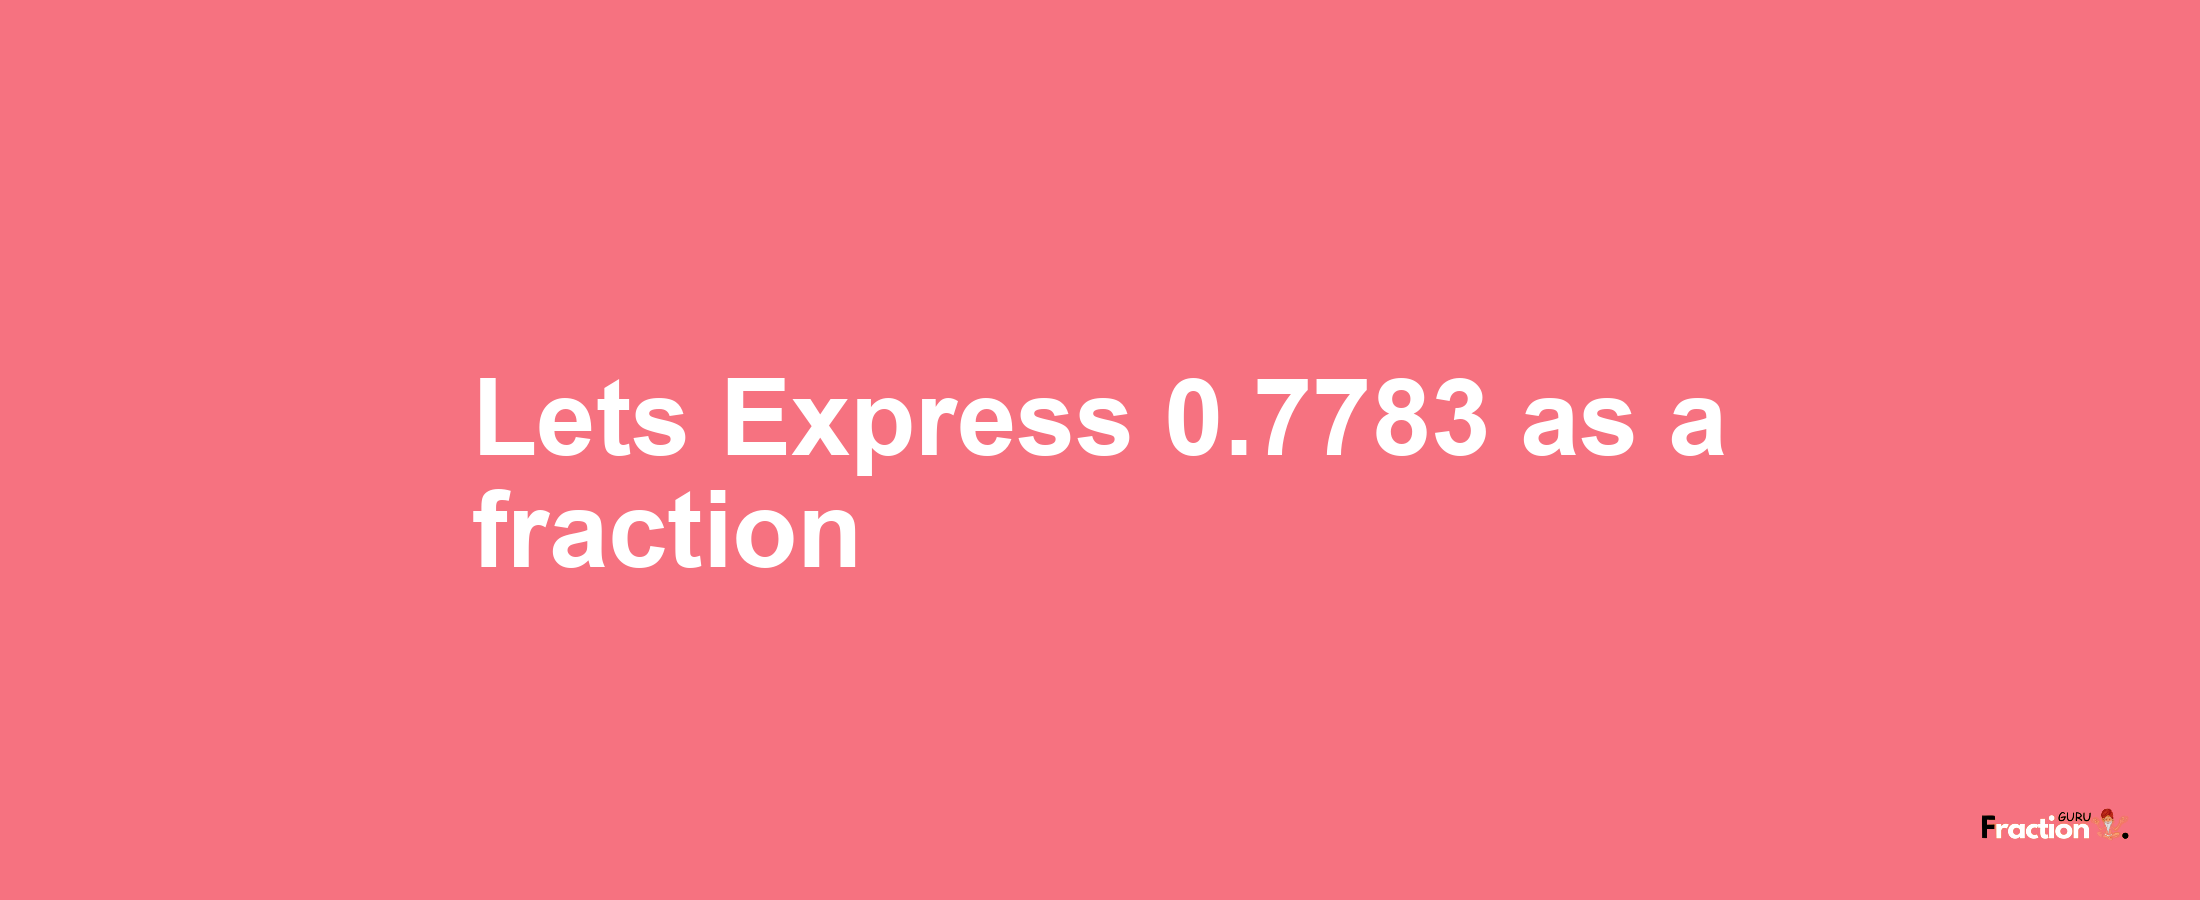 Lets Express 0.7783 as afraction